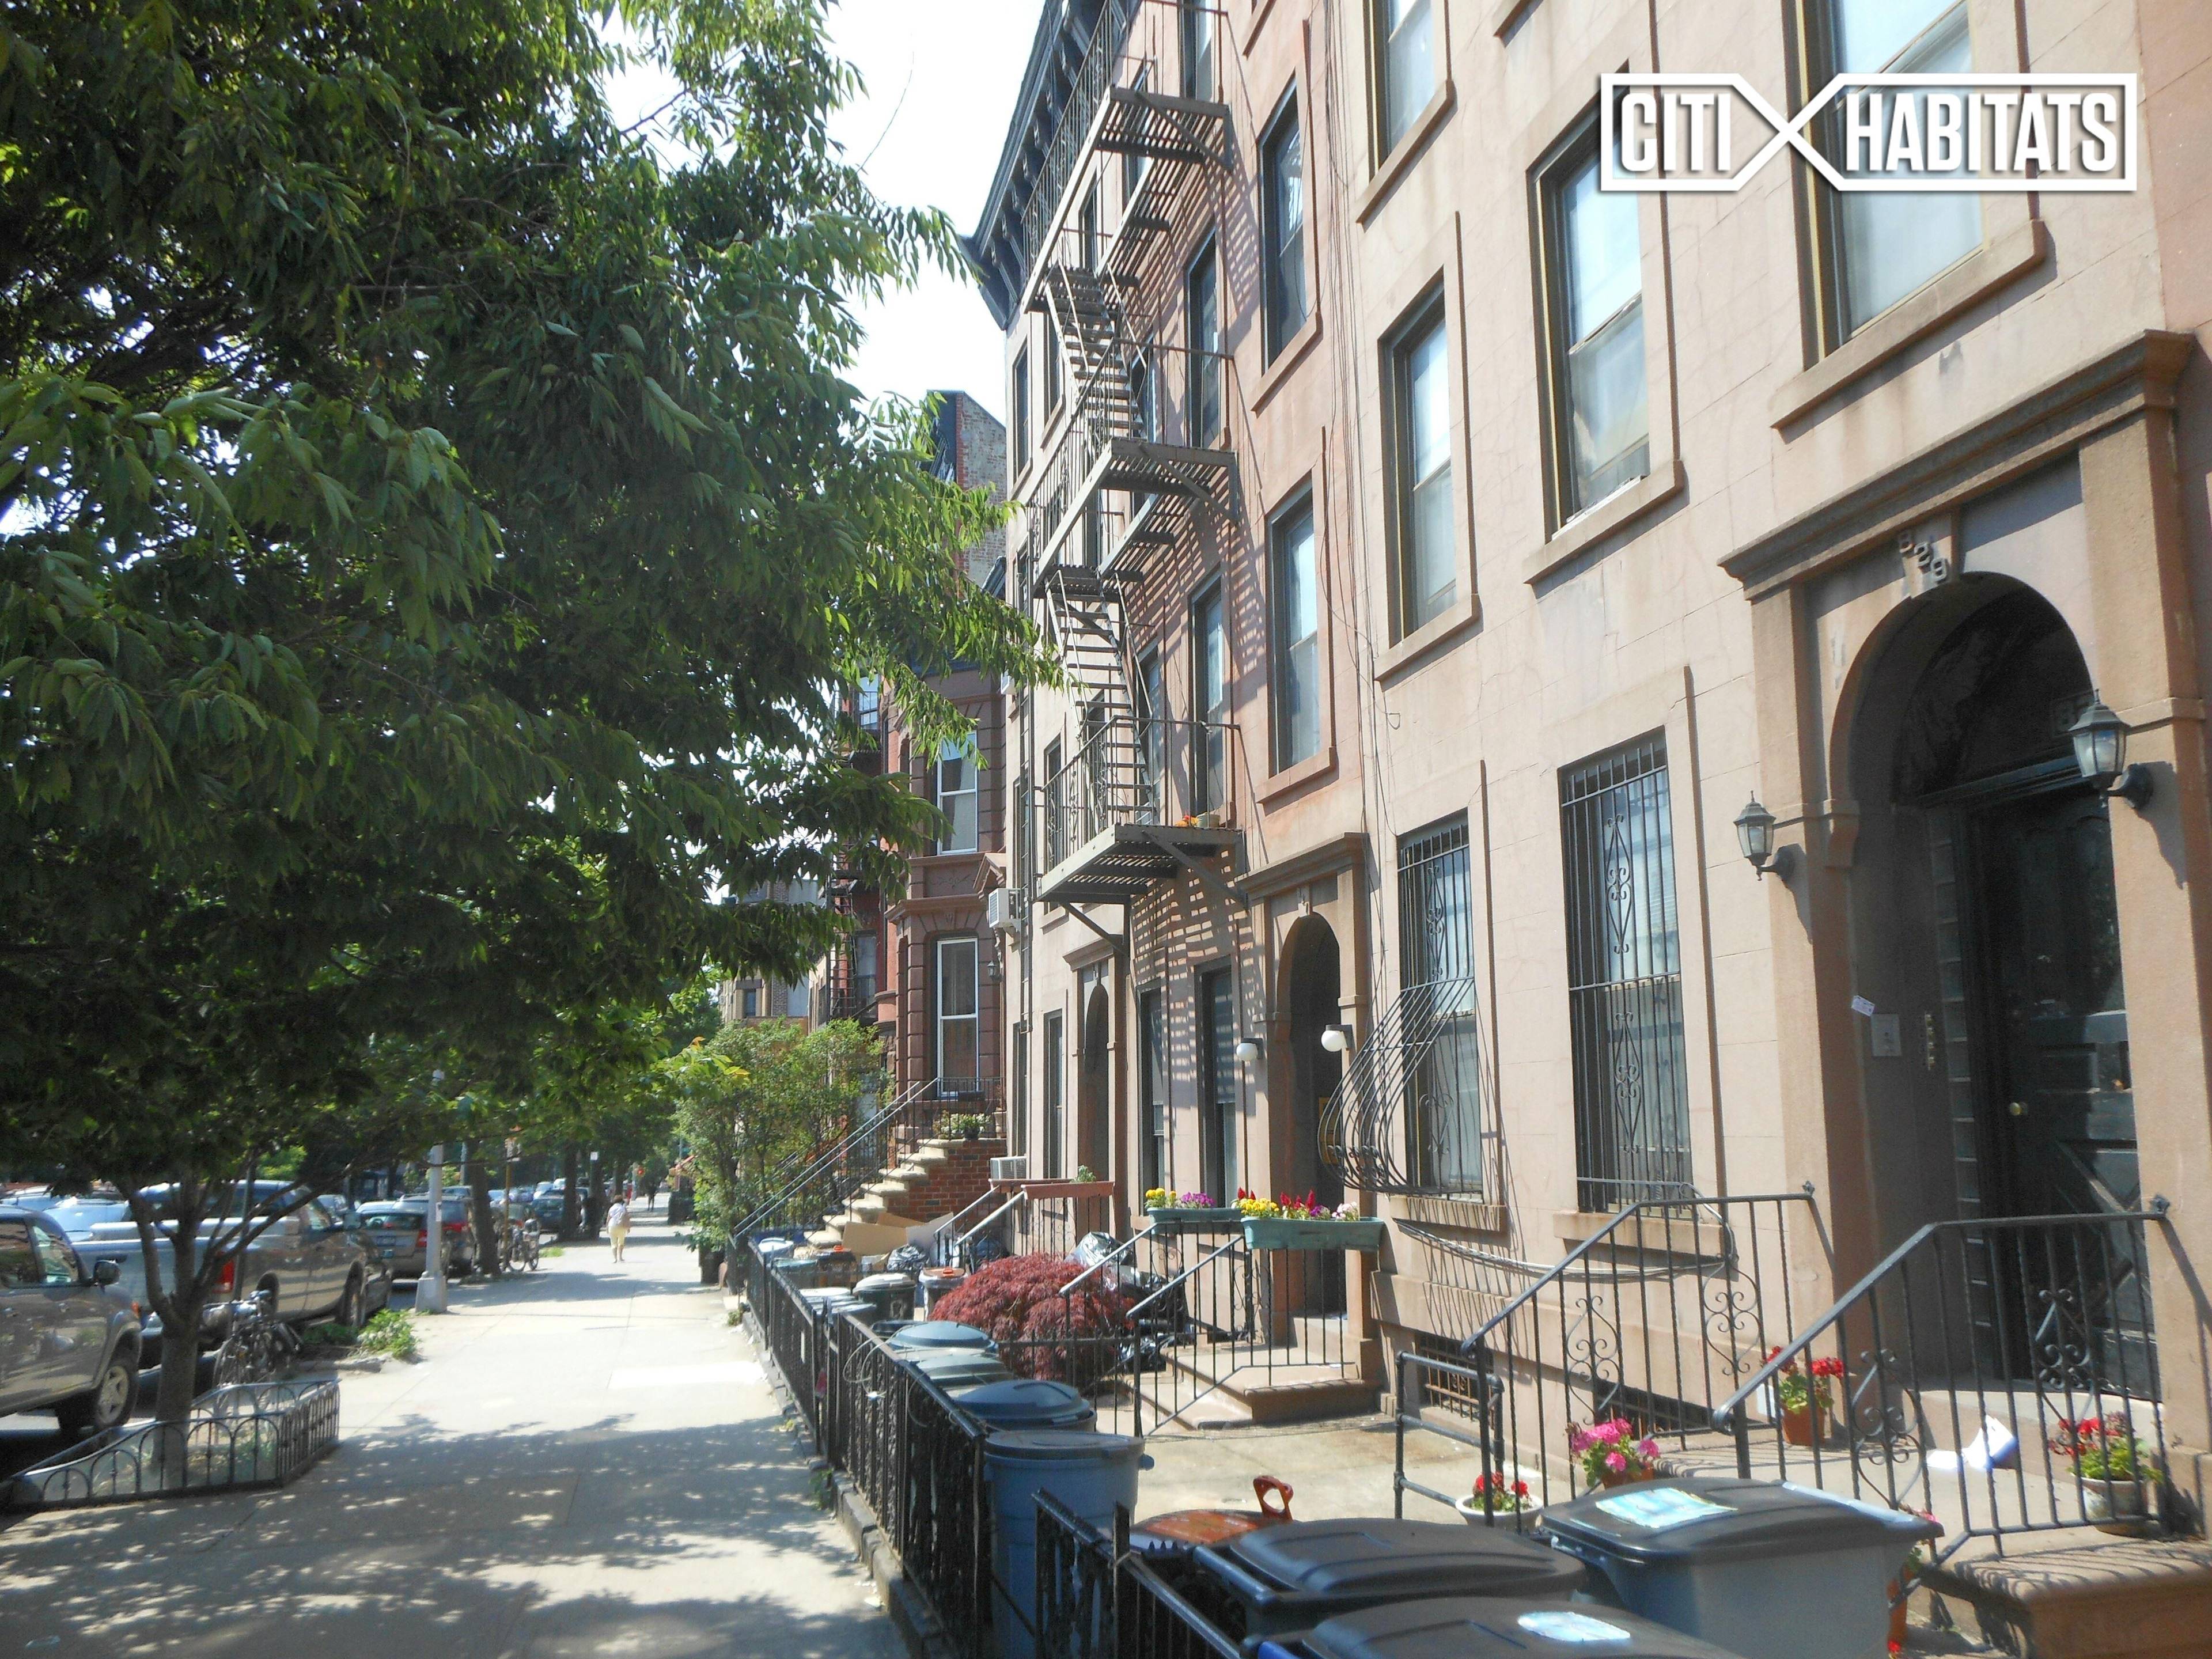 BROWNSTONE 3BR IN NORTH PARK SLOPE This roomy 3BR apartment features an updated kitchen with dishwasher, formal dining and living rooms, plus three bedrooms.